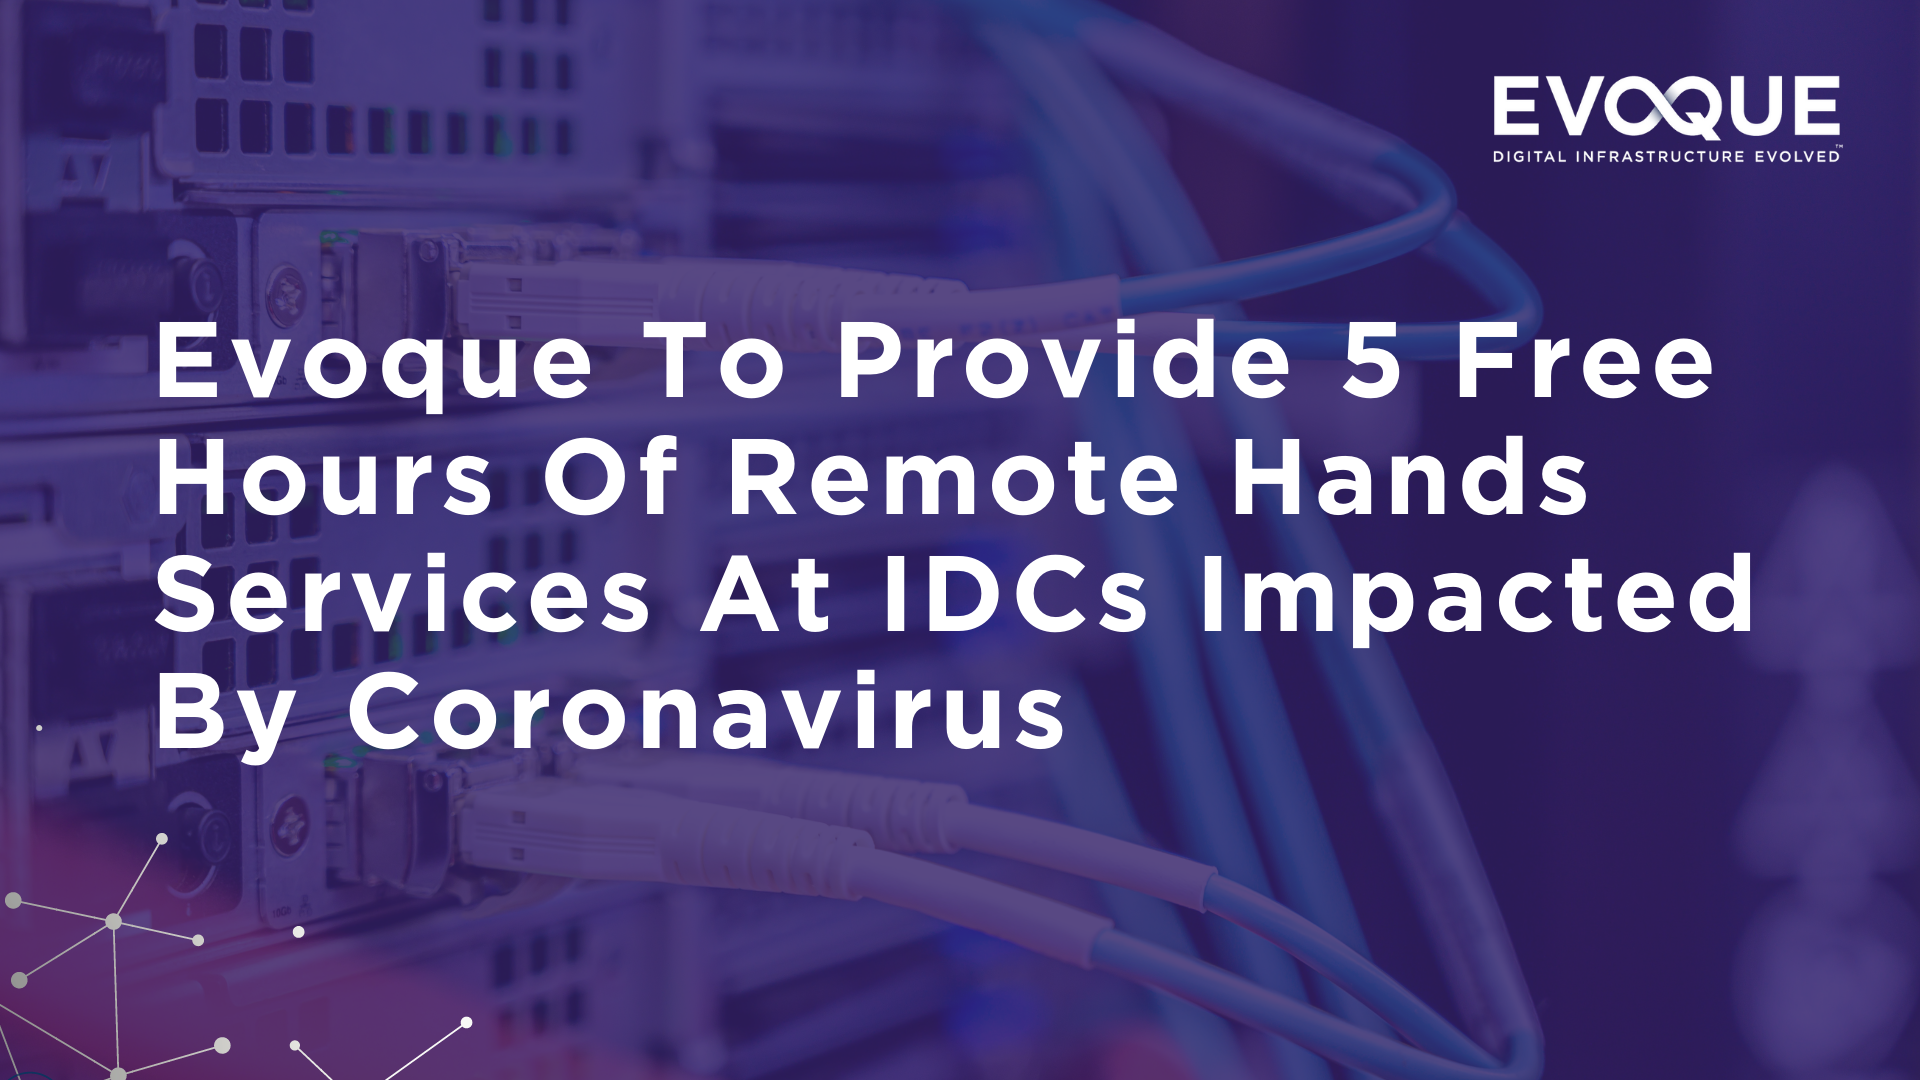 Evoque To Provide 5 Free Hours Of Remote Hands Services At IDCs Impacted By Coronavirus